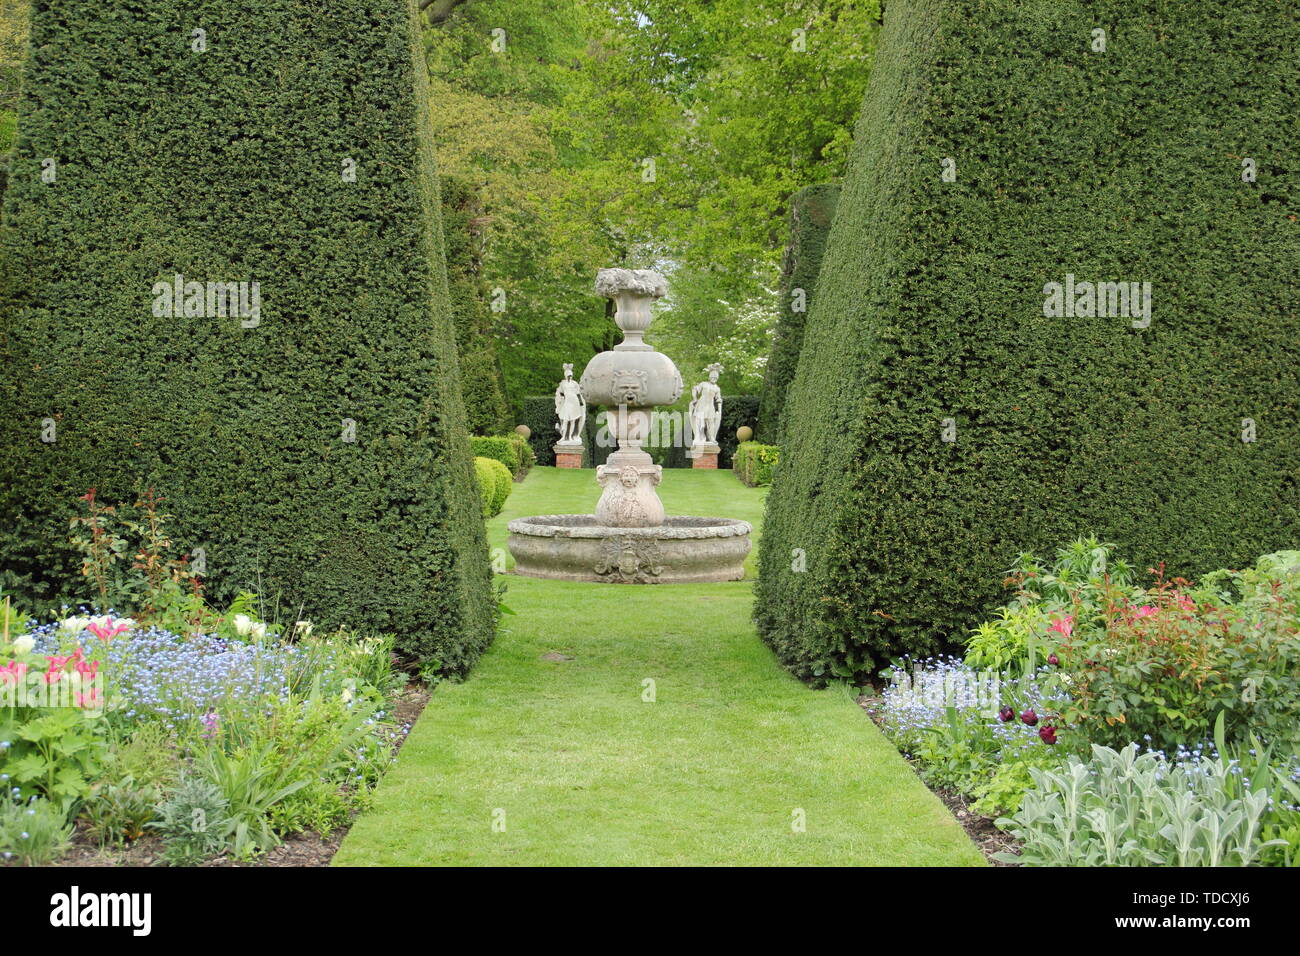 Taxus baccata. Statuary and herbacrous borders seen from yew hedging in the Italianate gardens at Renishaw Hall and Gardens, Derbyshire in May Stock Photo